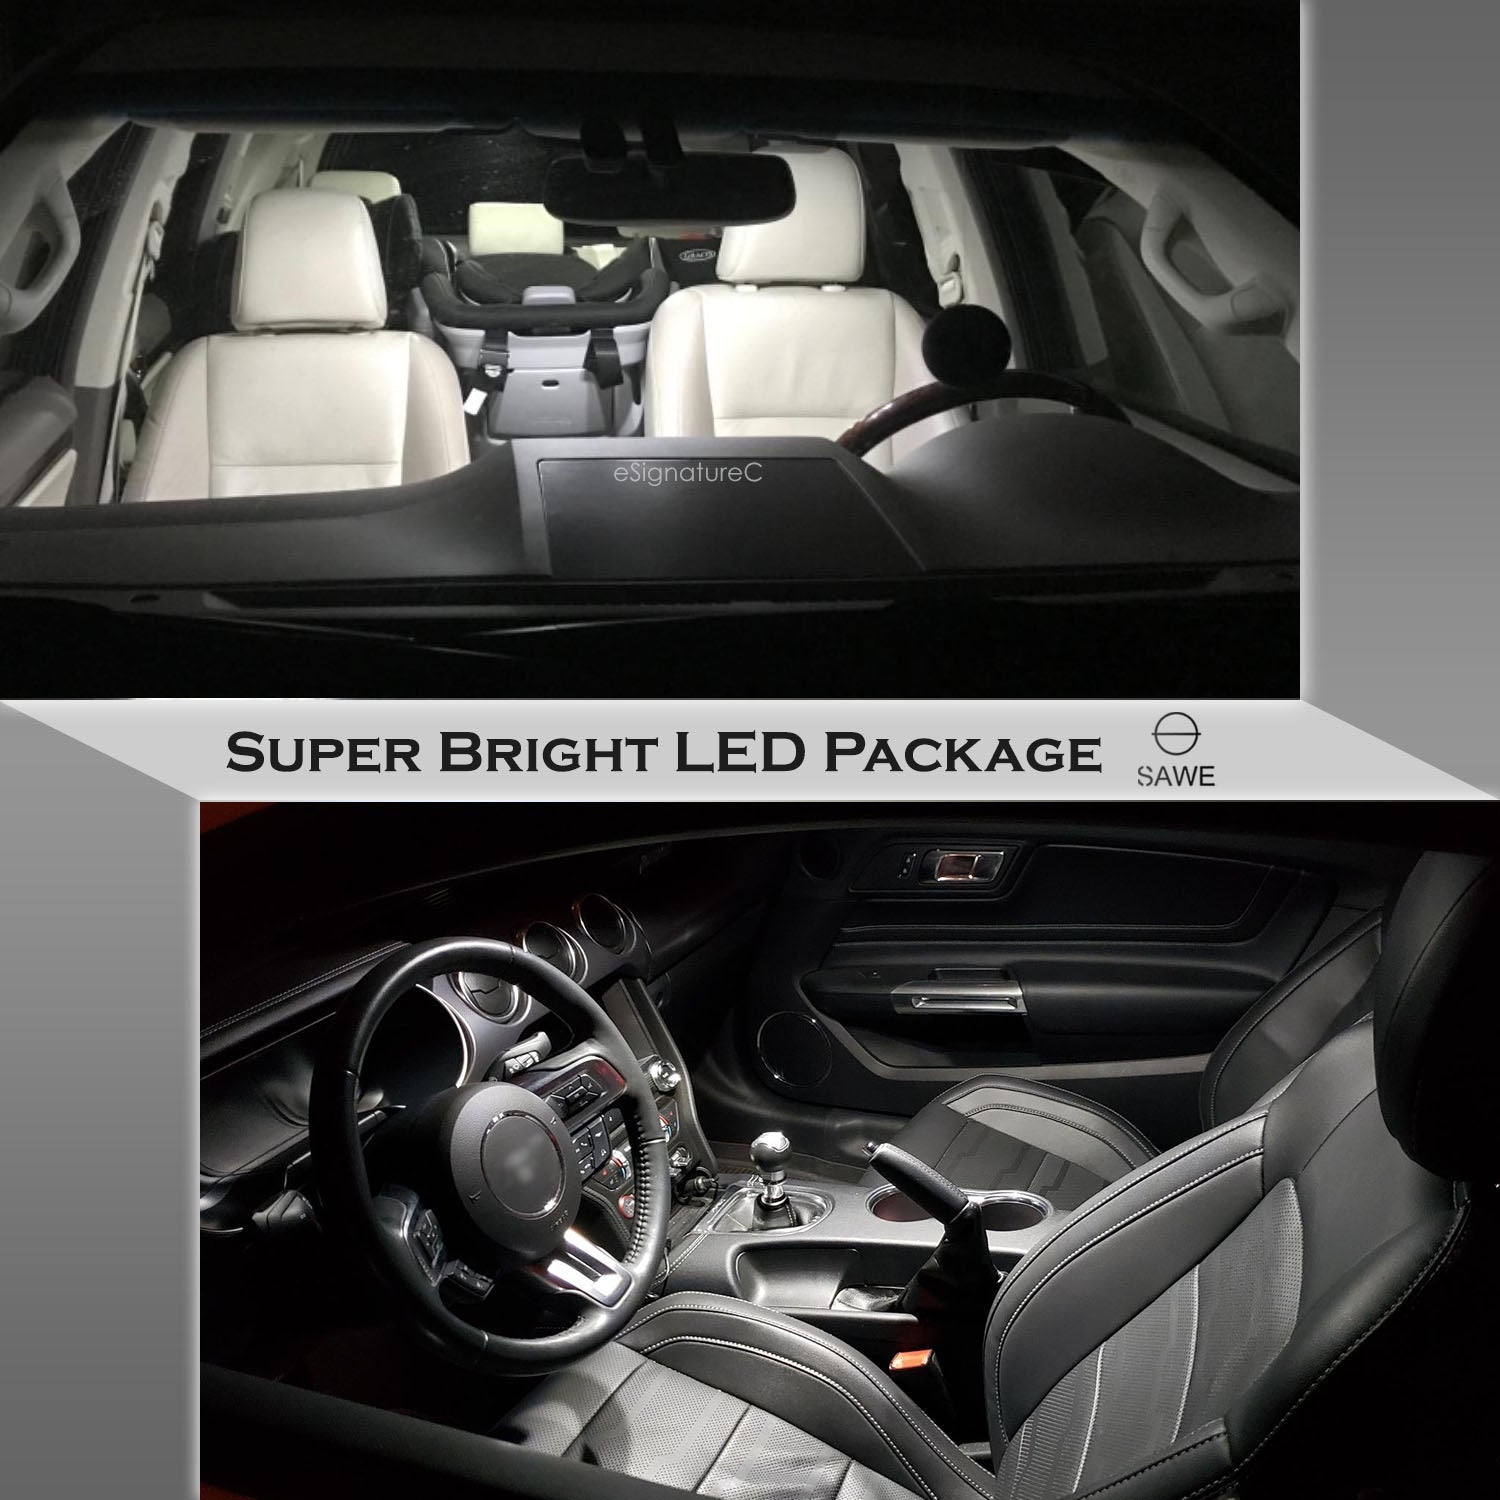 For Hyundai Genesis Coupe Interior LED Lights - Dome & Map Light Bulbs Package Kit for 2010 - 2016 - White